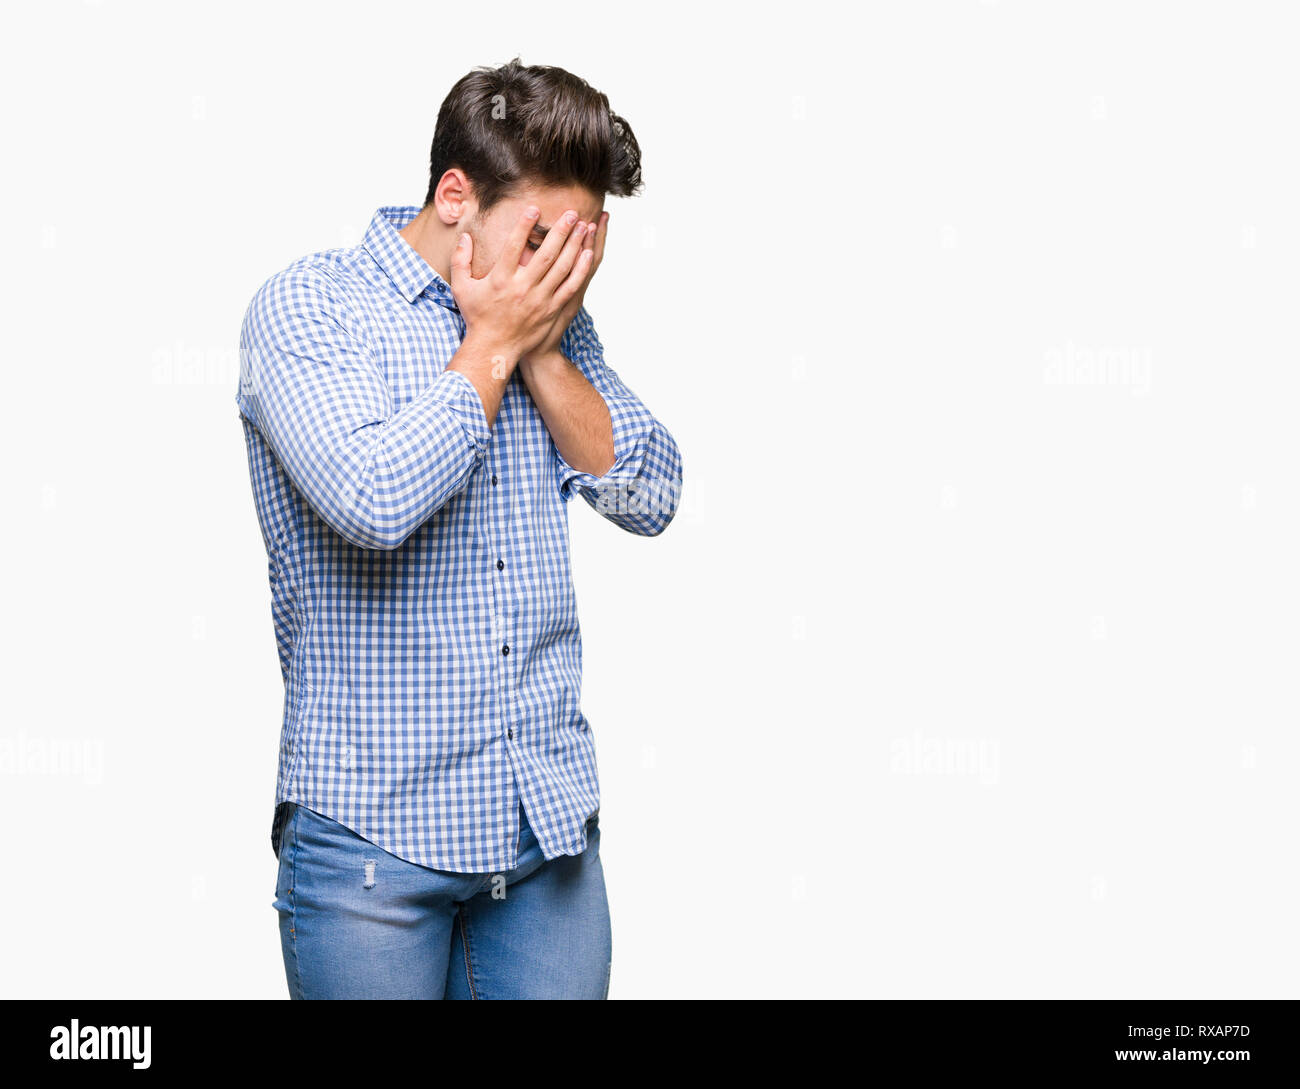 Young handsome business man over isolated background with sad expression covering face with hands while crying. Depression concept. Stock Photo